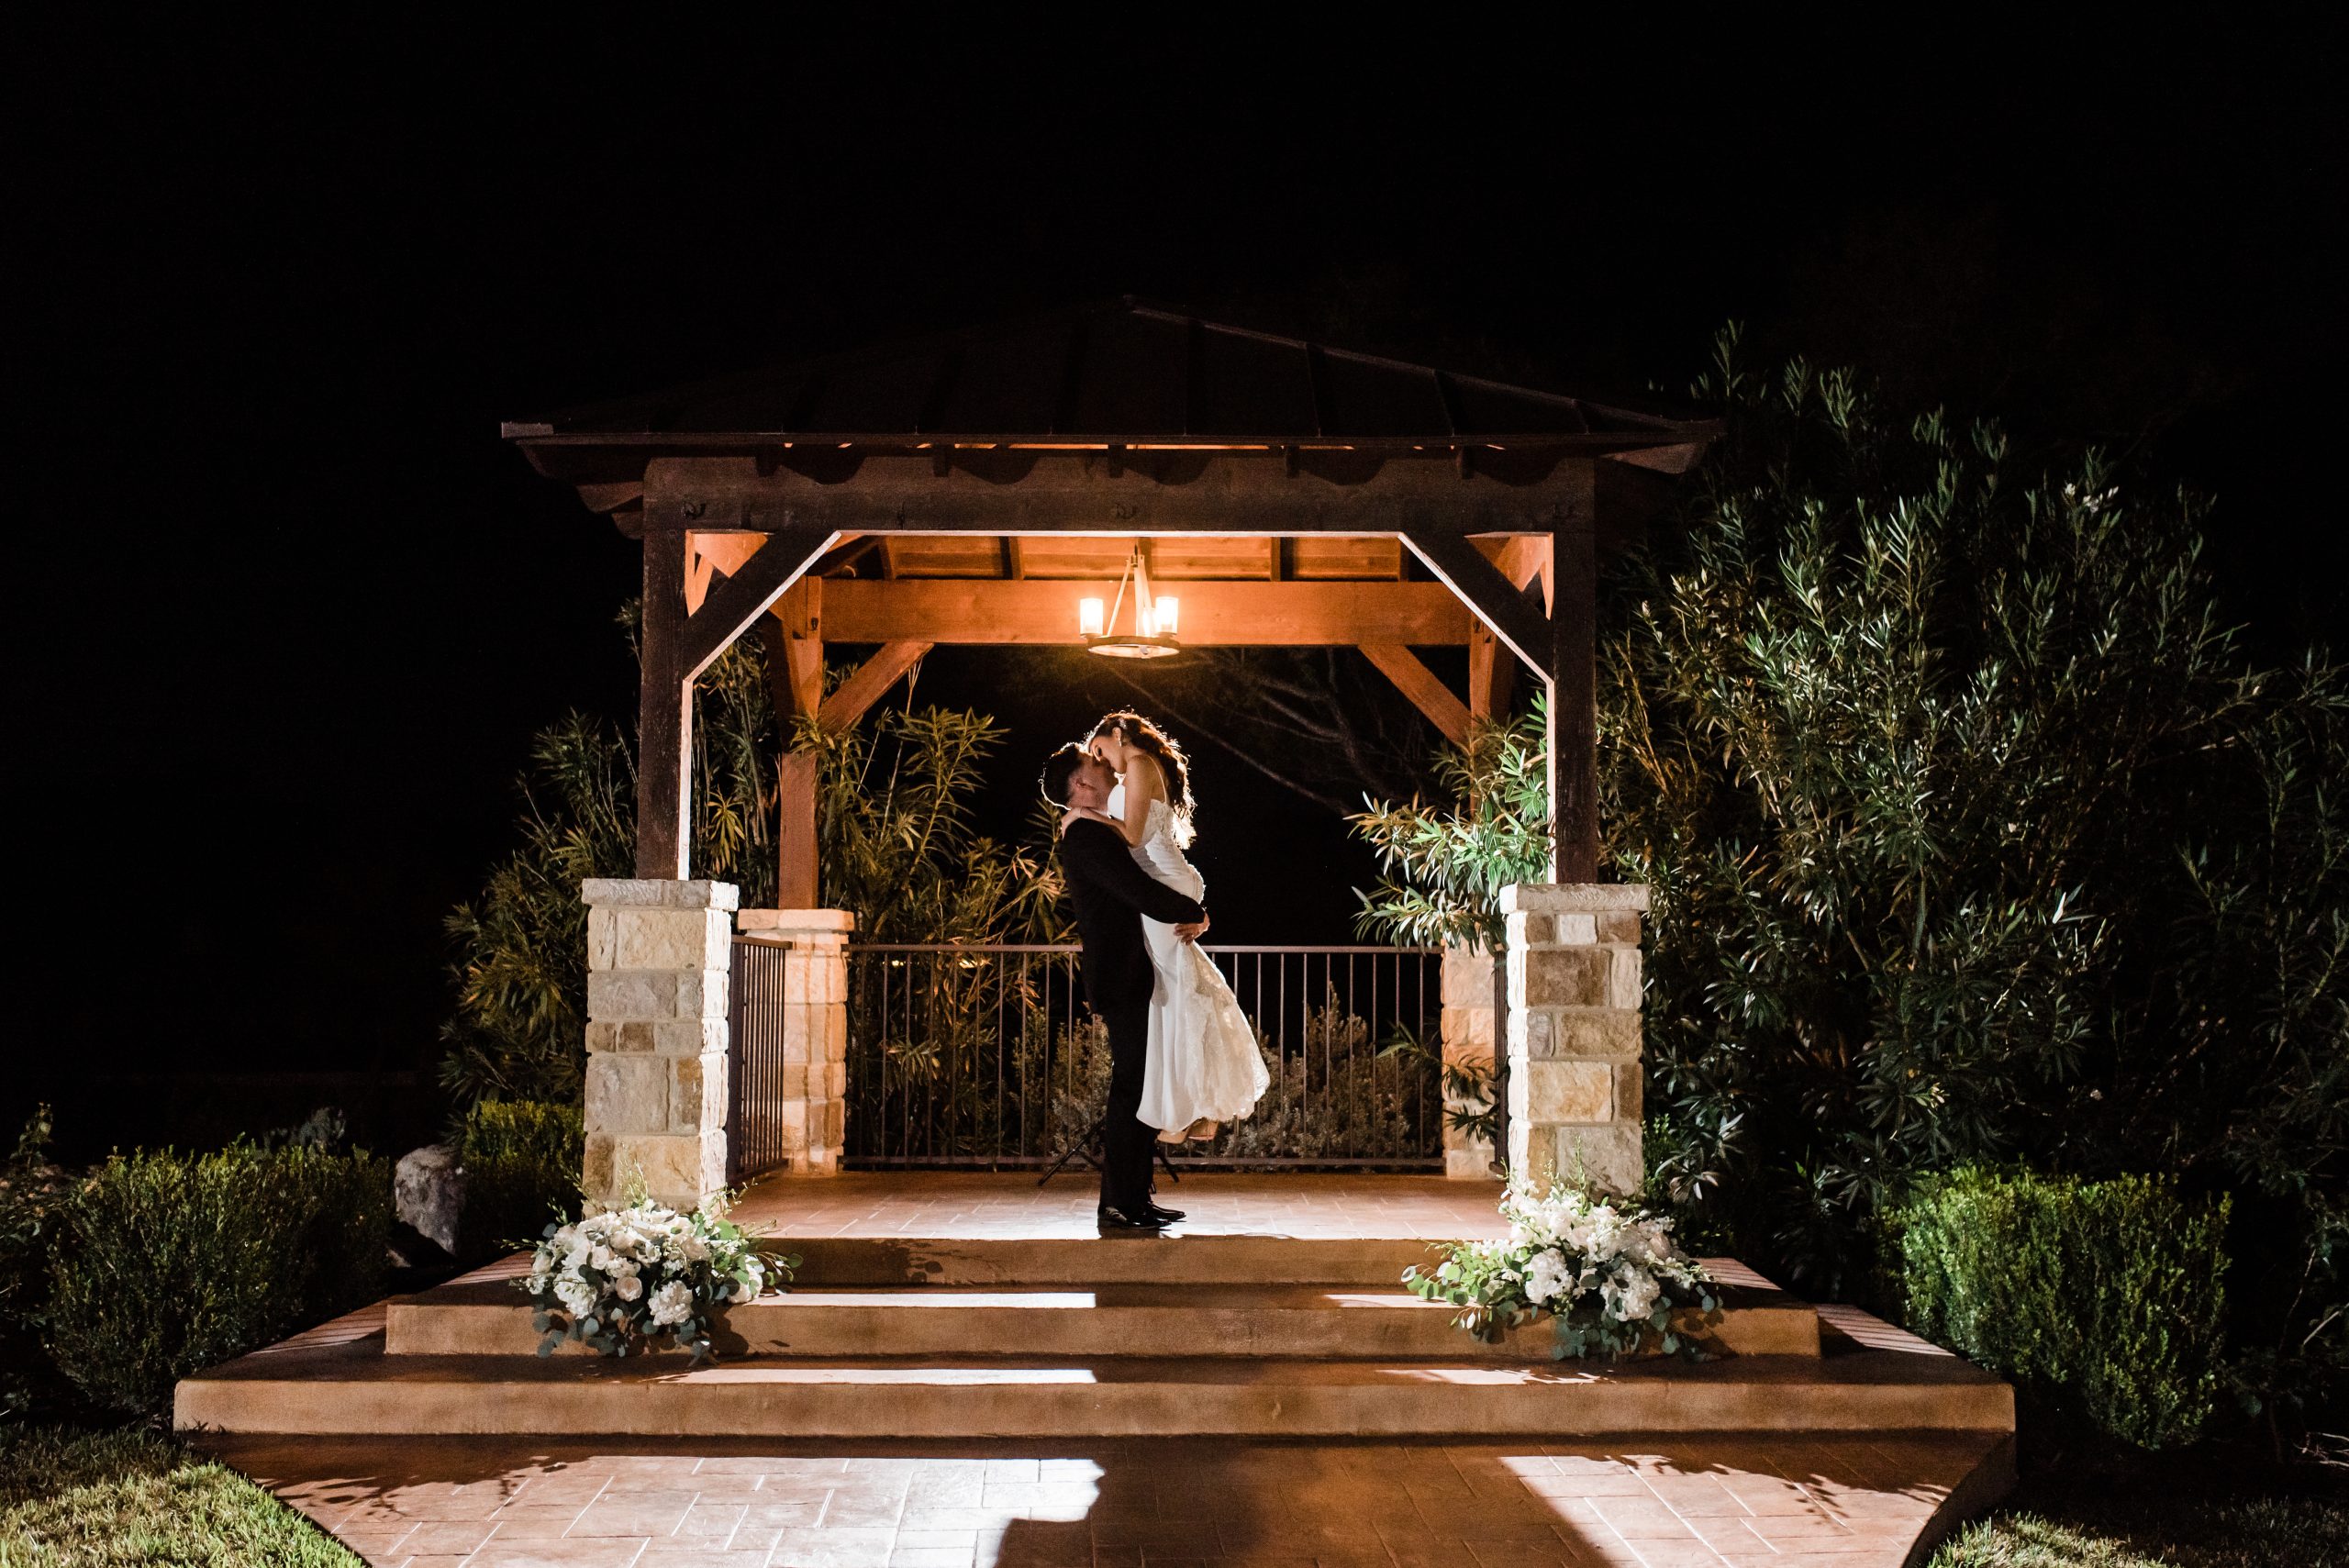 The Best Time to Have an Outdoor Wedding in Texas